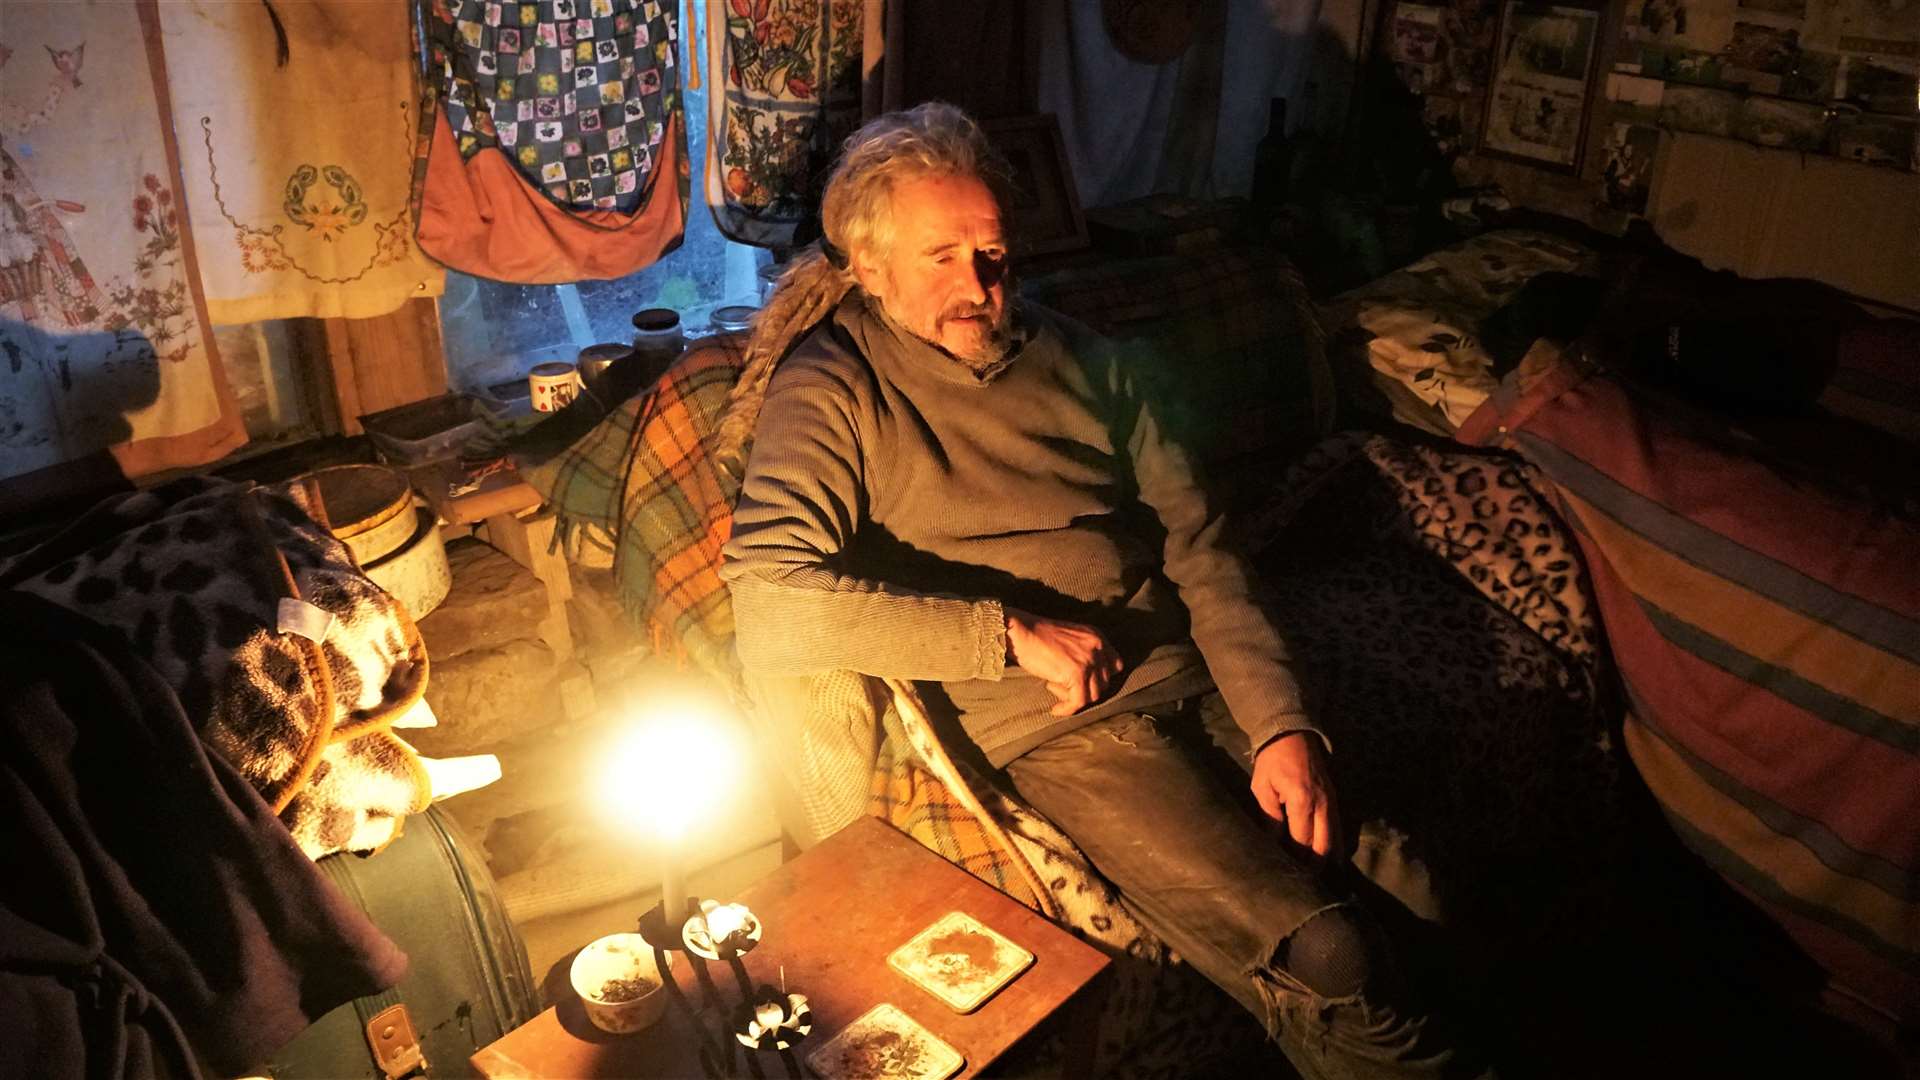 Marcus relaxes in his cosy bedroom. He has no electricity and uses candles to light the house. Picture: DGS